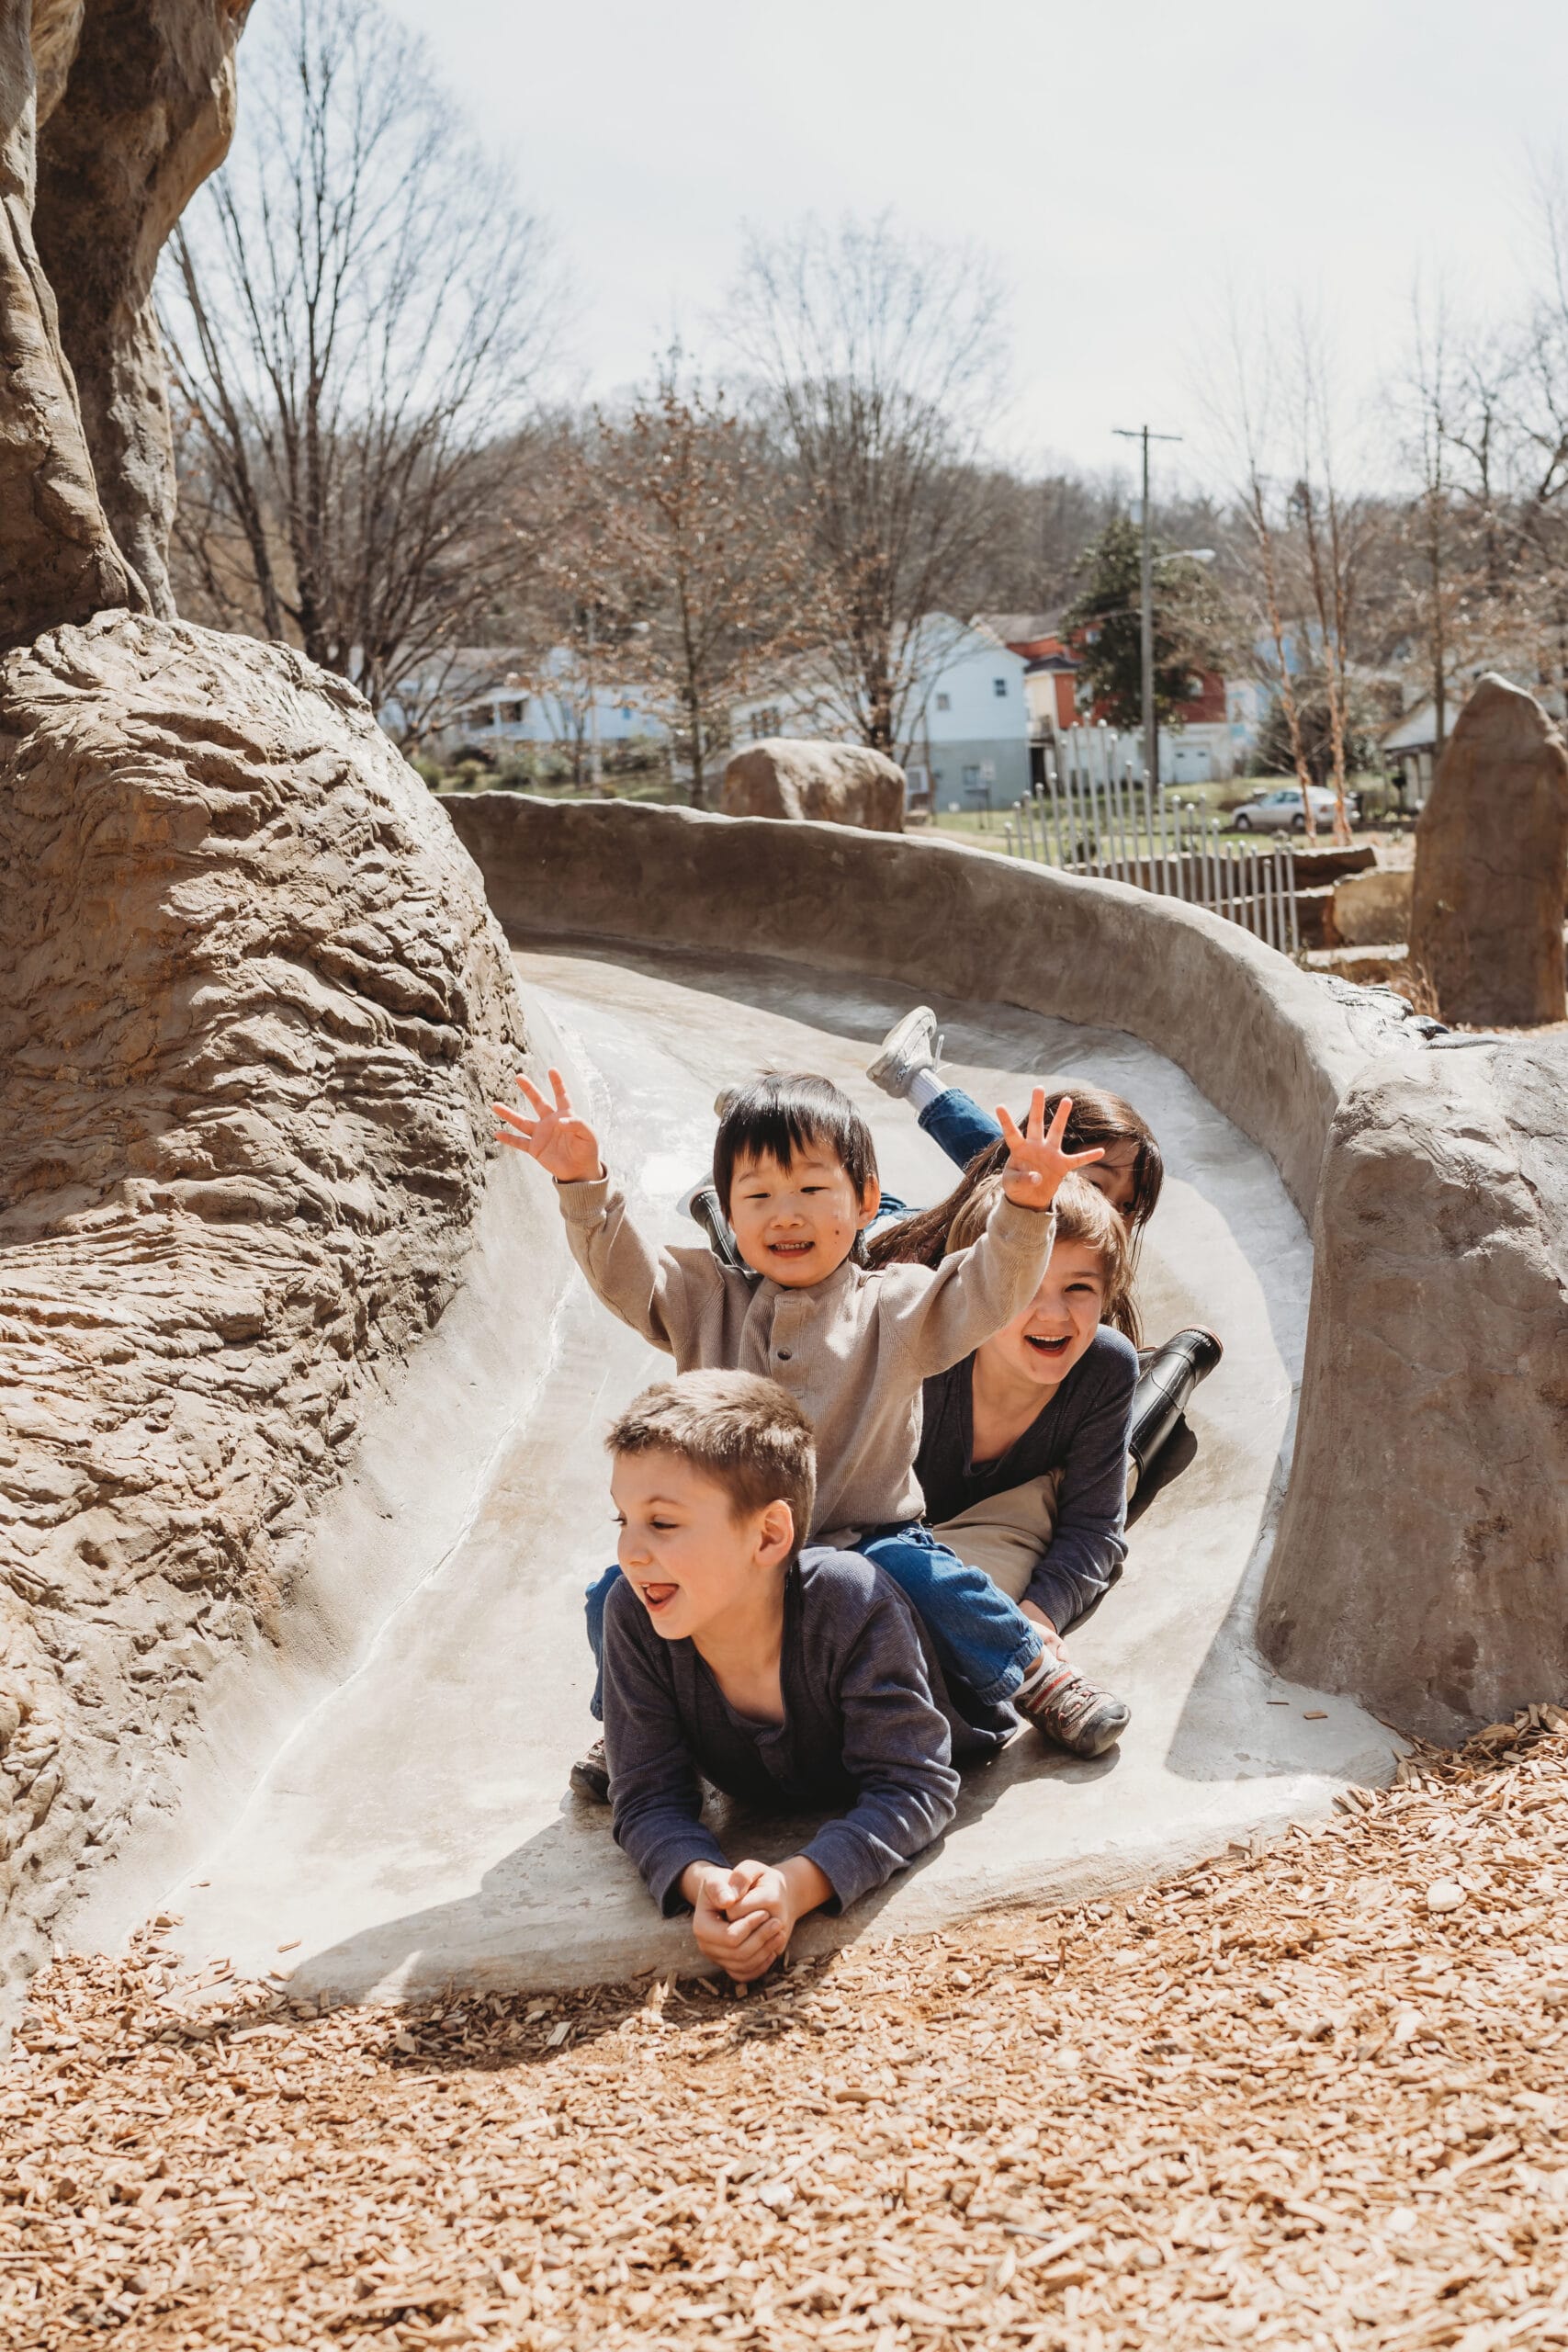 A group of children playing on a slide at a zoo.